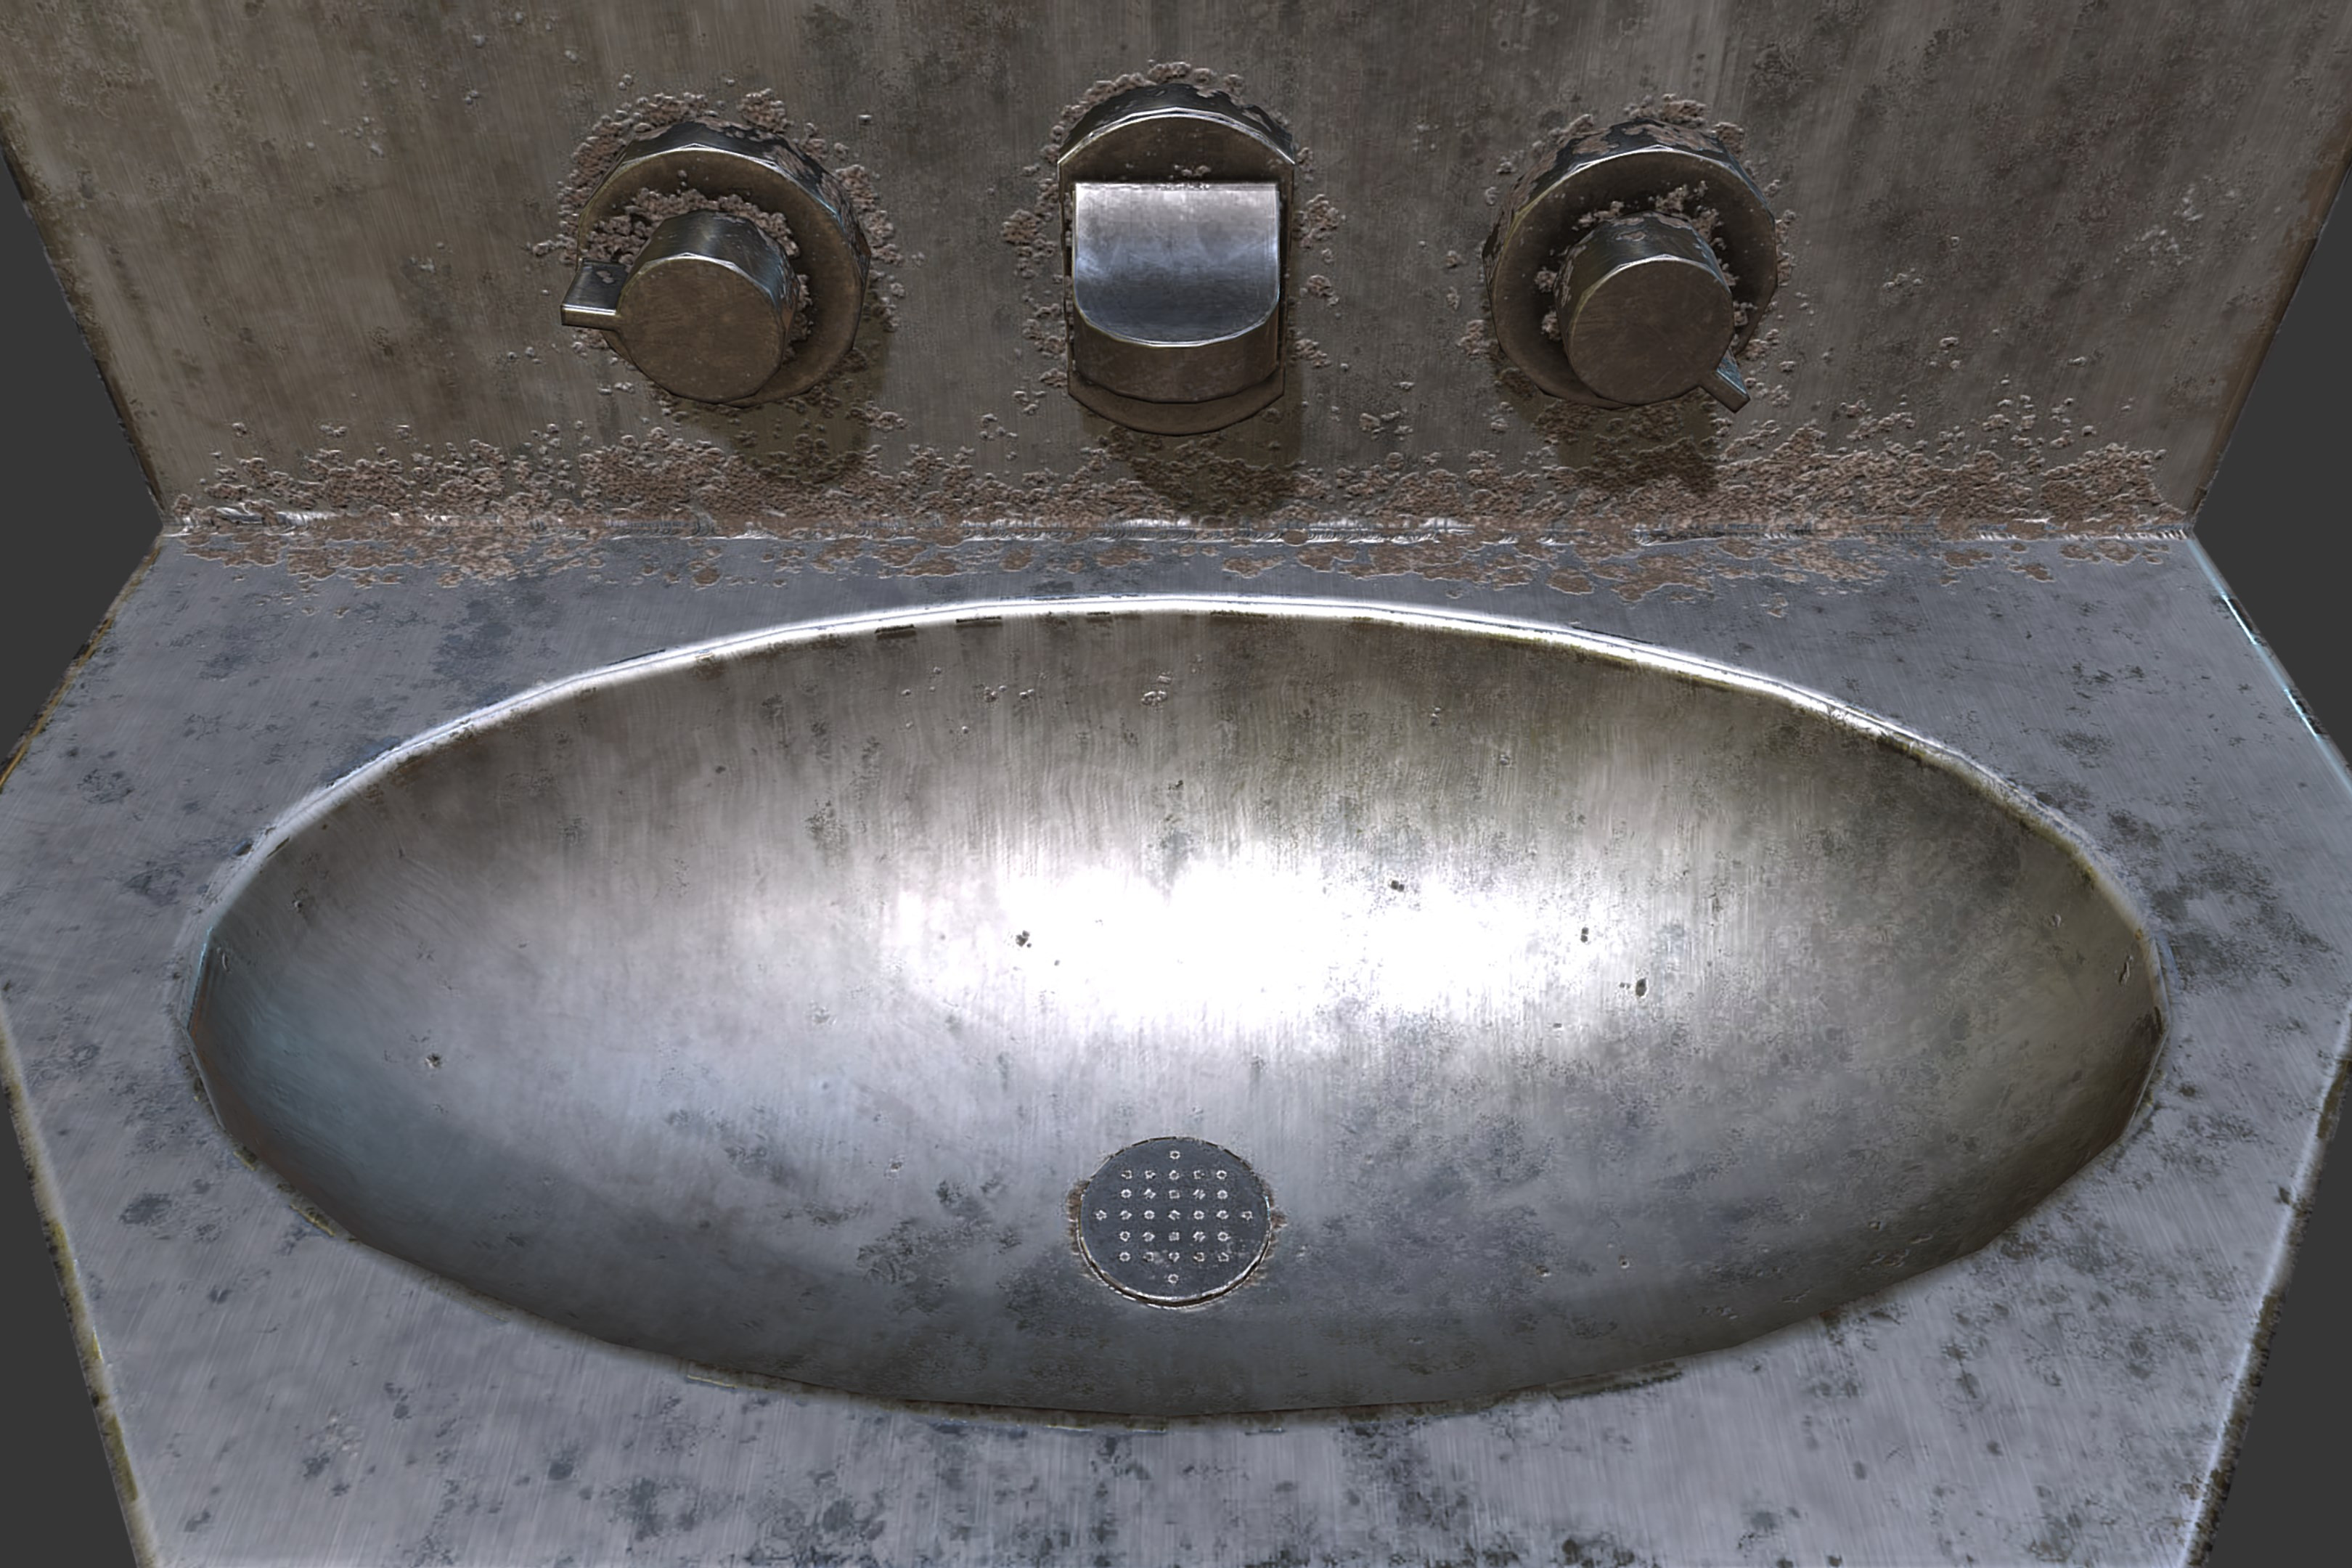 Prison Toilet Sink for Jail Cell Asset Pack - detail